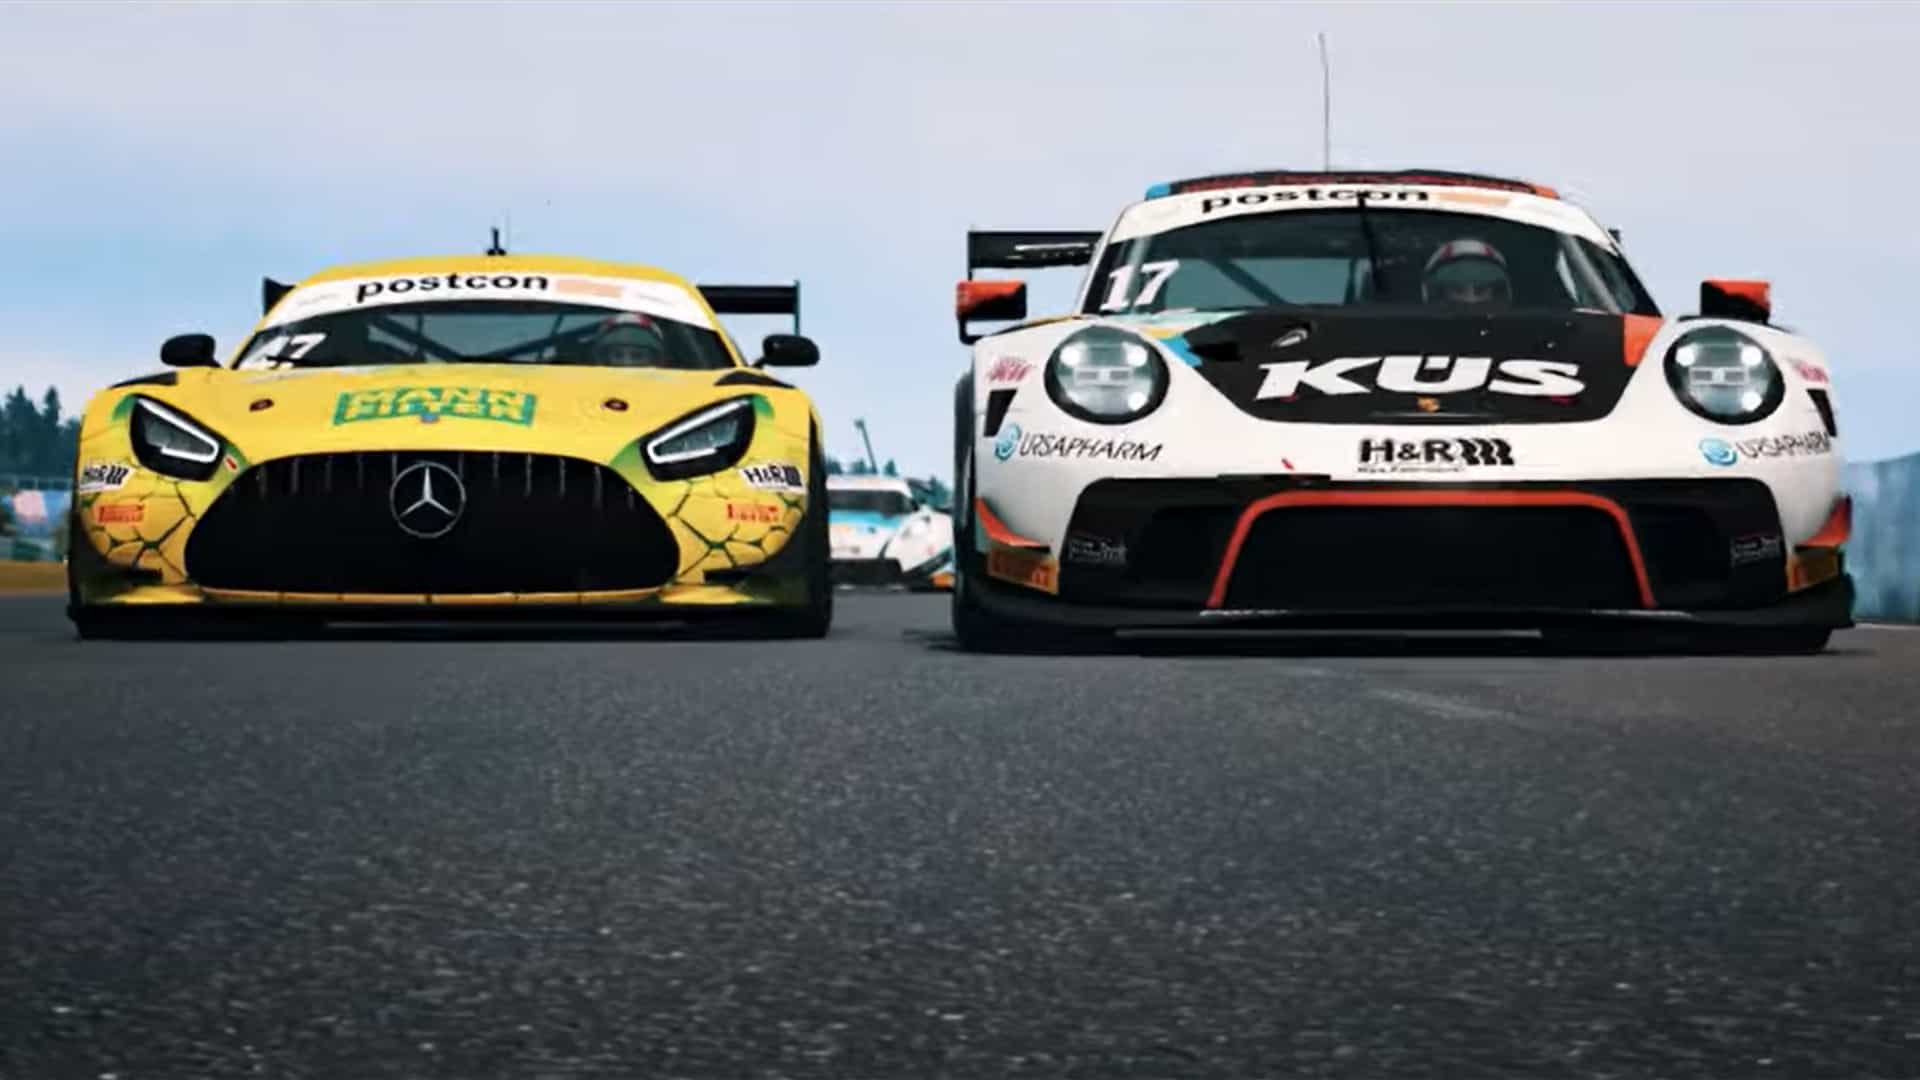 Lifetime RaceRoom content up for grabs in video competition